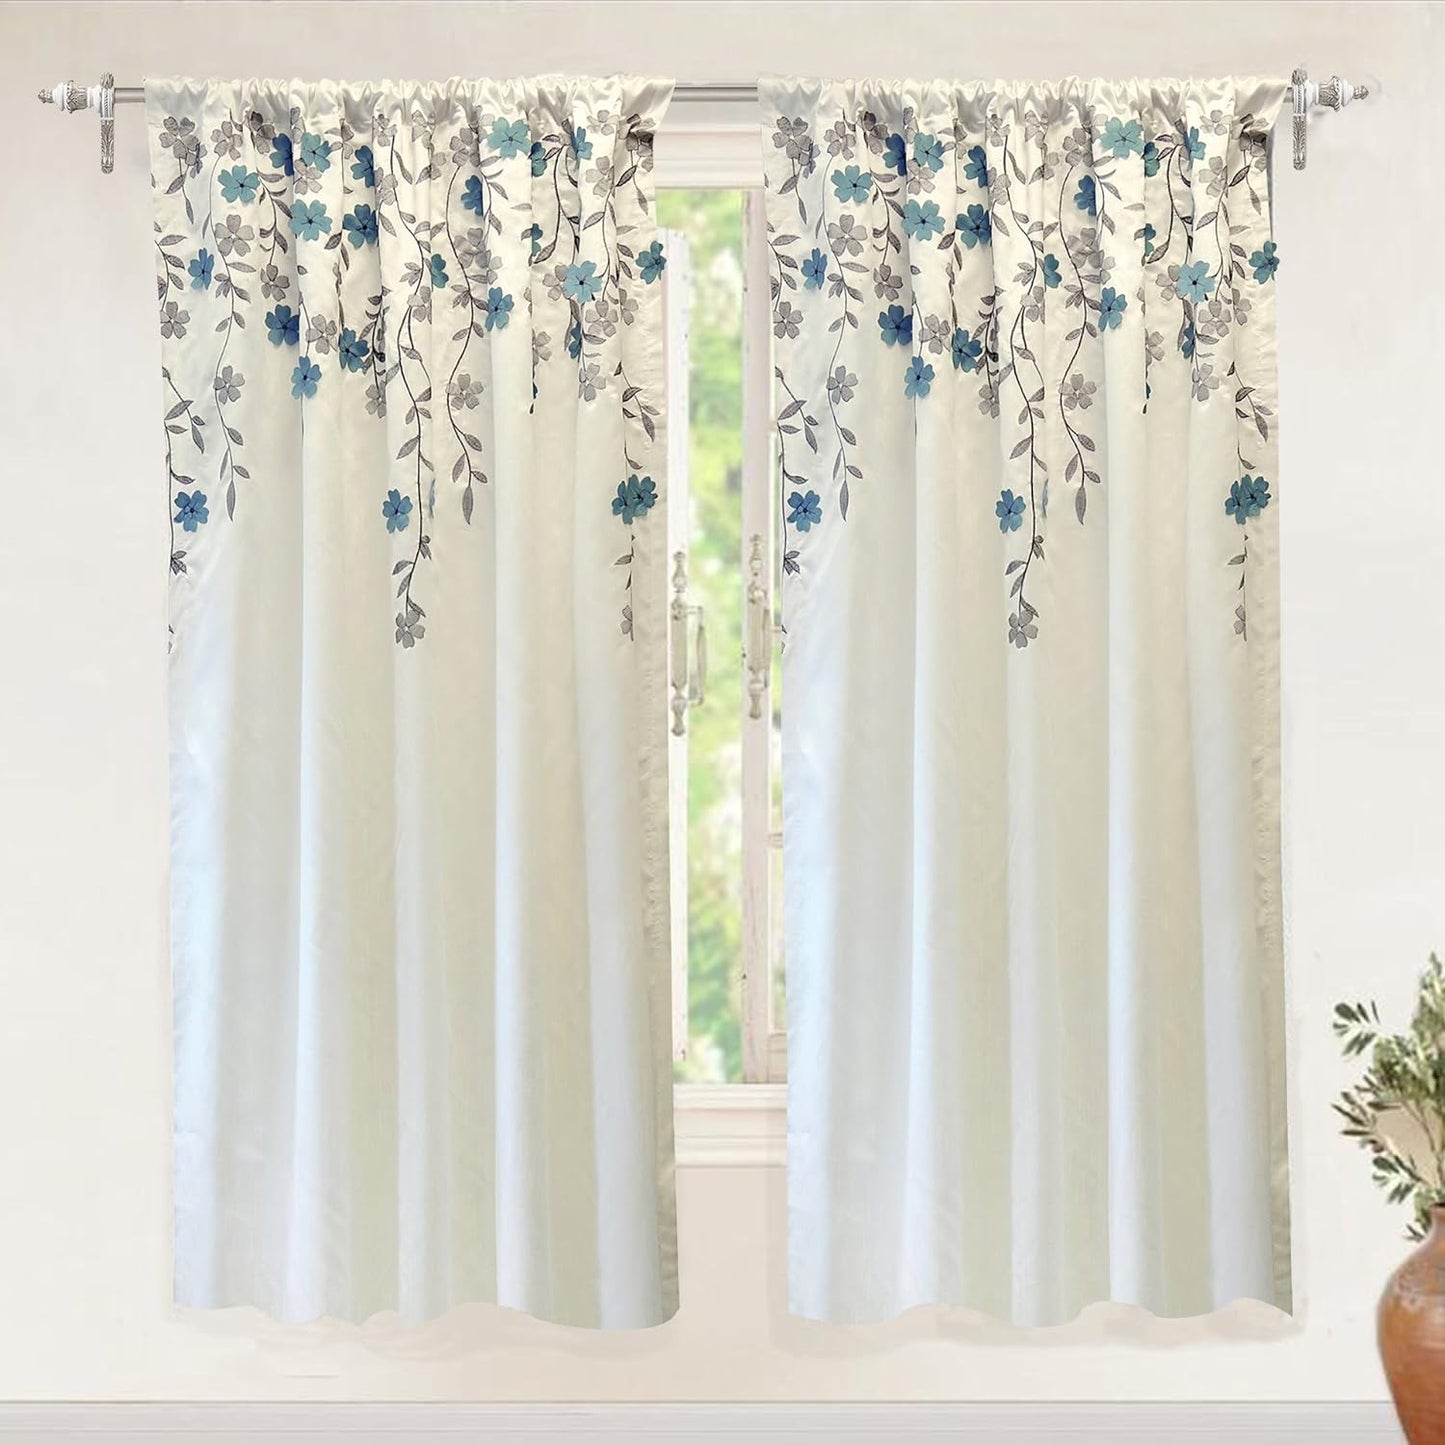 Driftaway Aubree Weeping Flower Print Thermal Room Darkening Privacy Window Curtain for Bedroom Living Room Rod Pocket 2 Panels 52 Inch by 84 Inch Blue  DriftAway One Panel Ivory Blue 50"X63" 